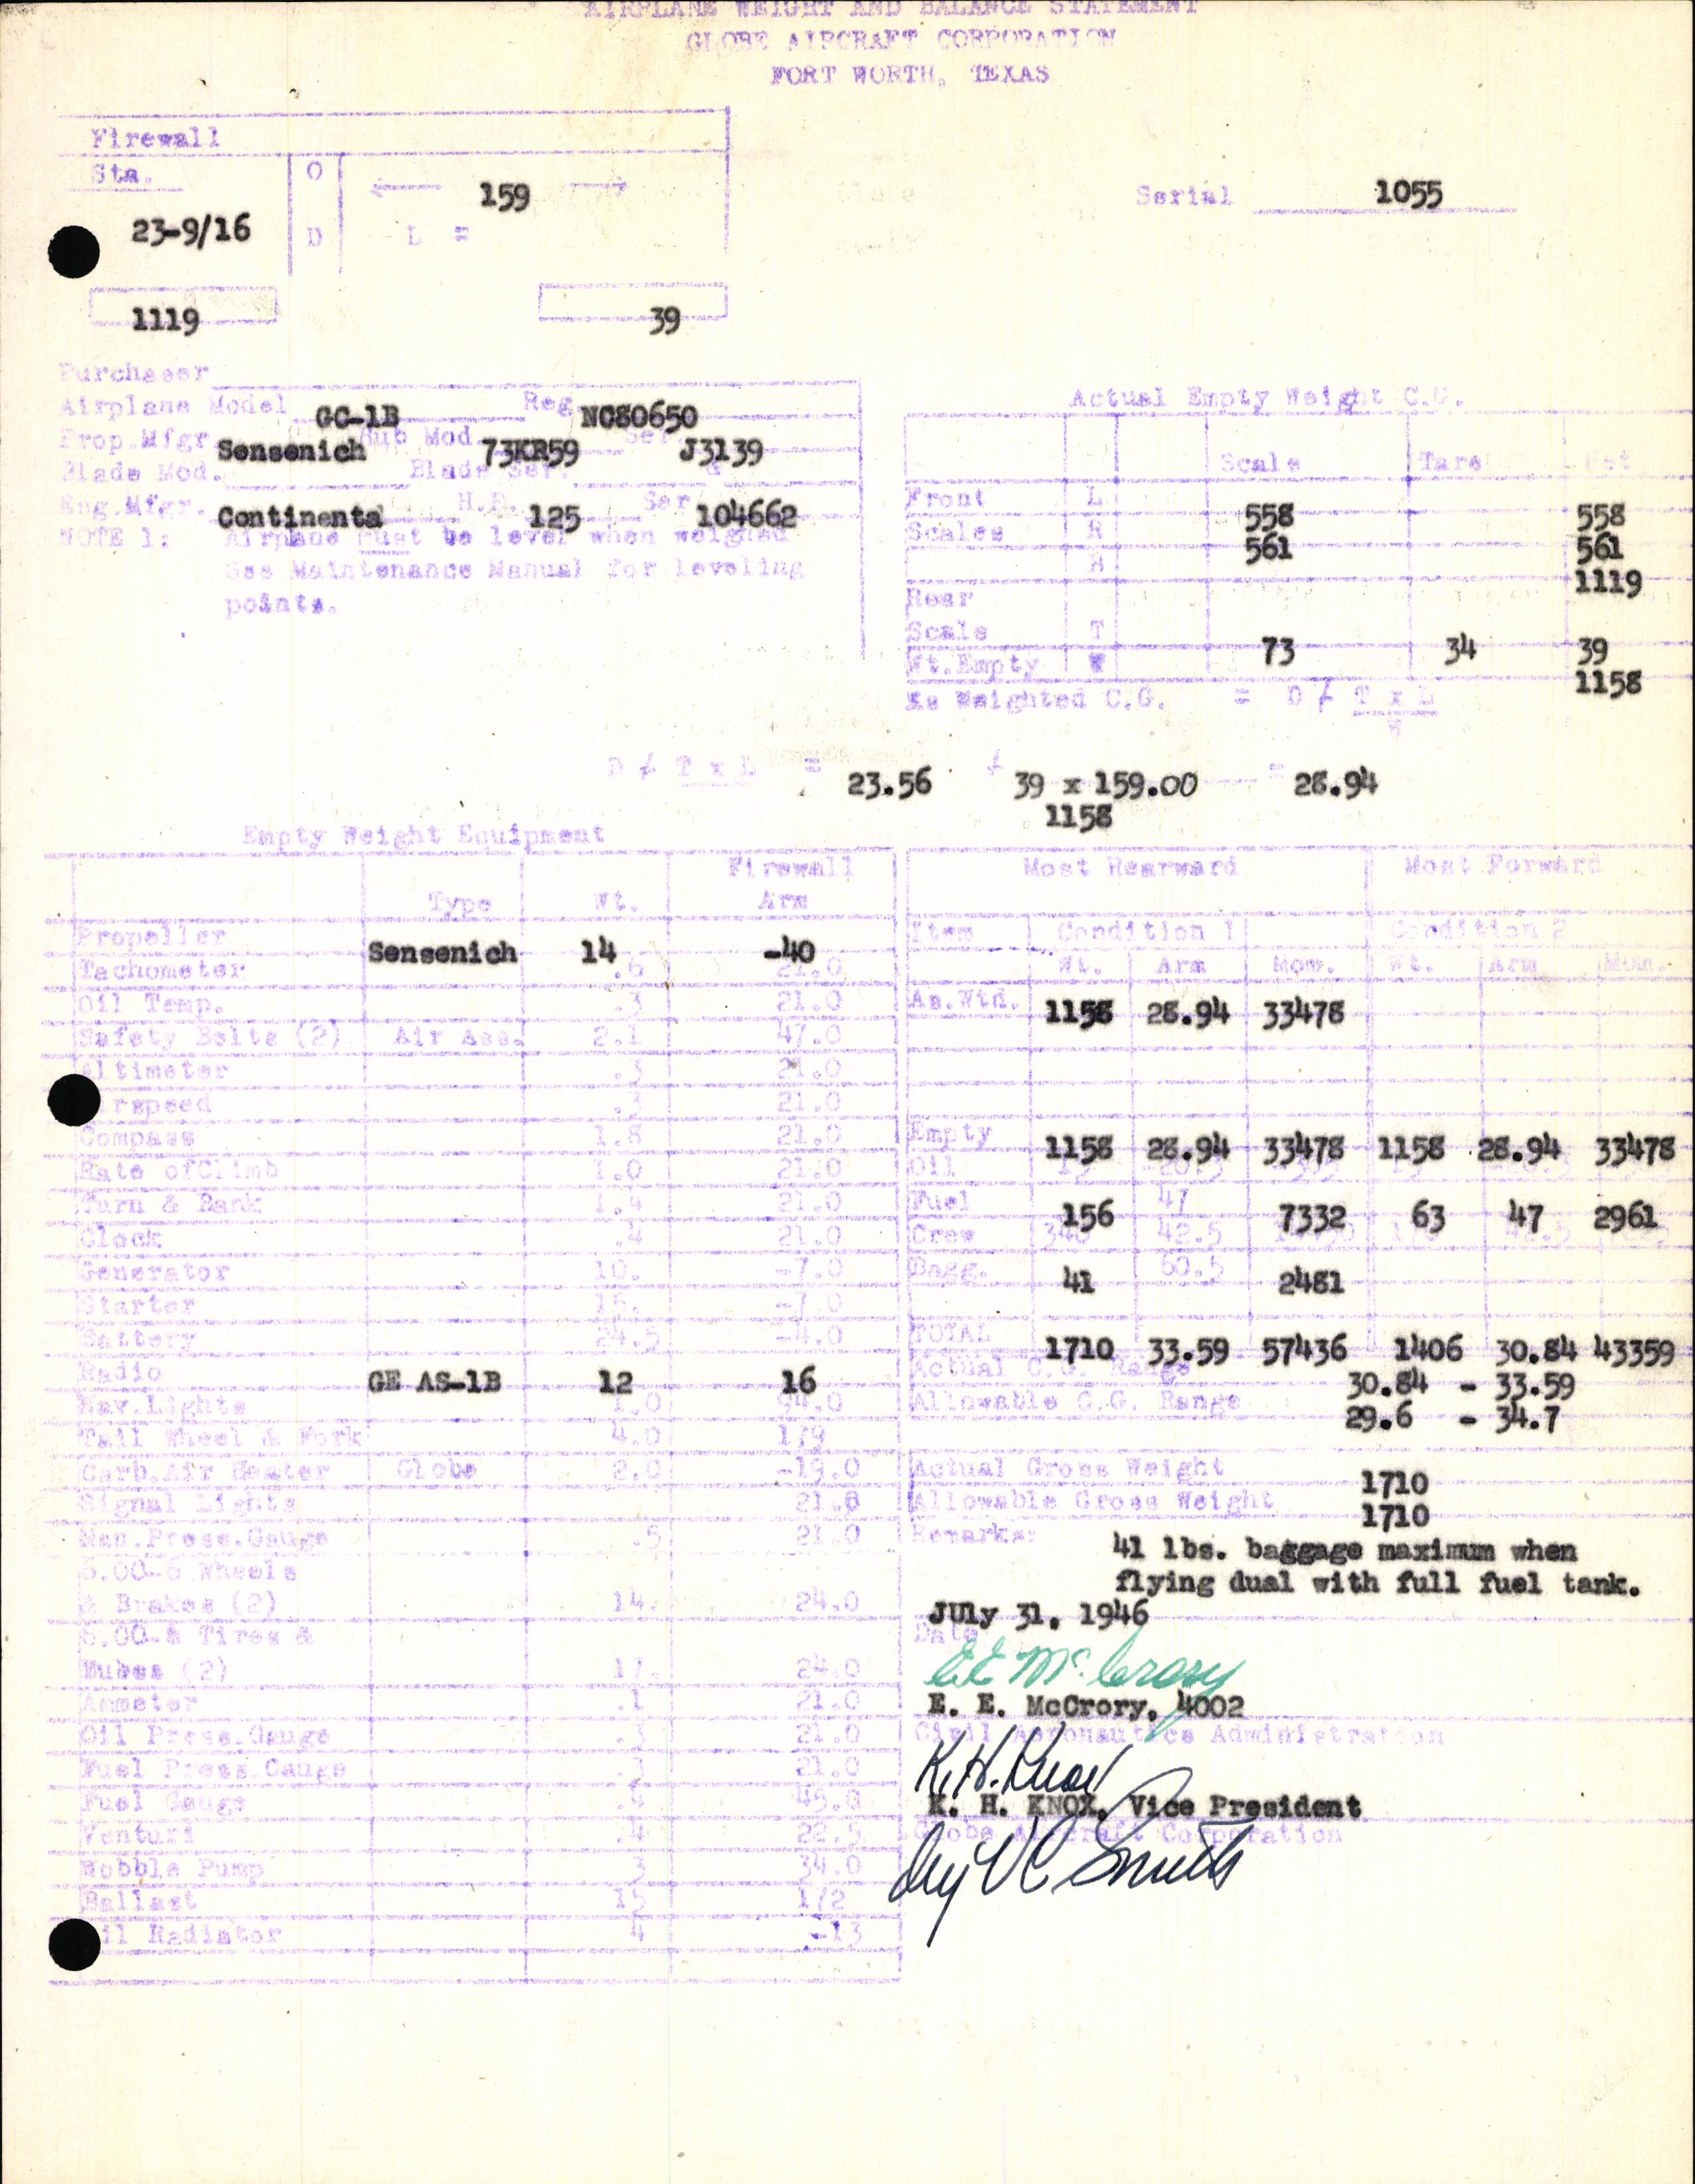 Sample page 5 from AirCorps Library document: Technical Information for Serial Number 1055